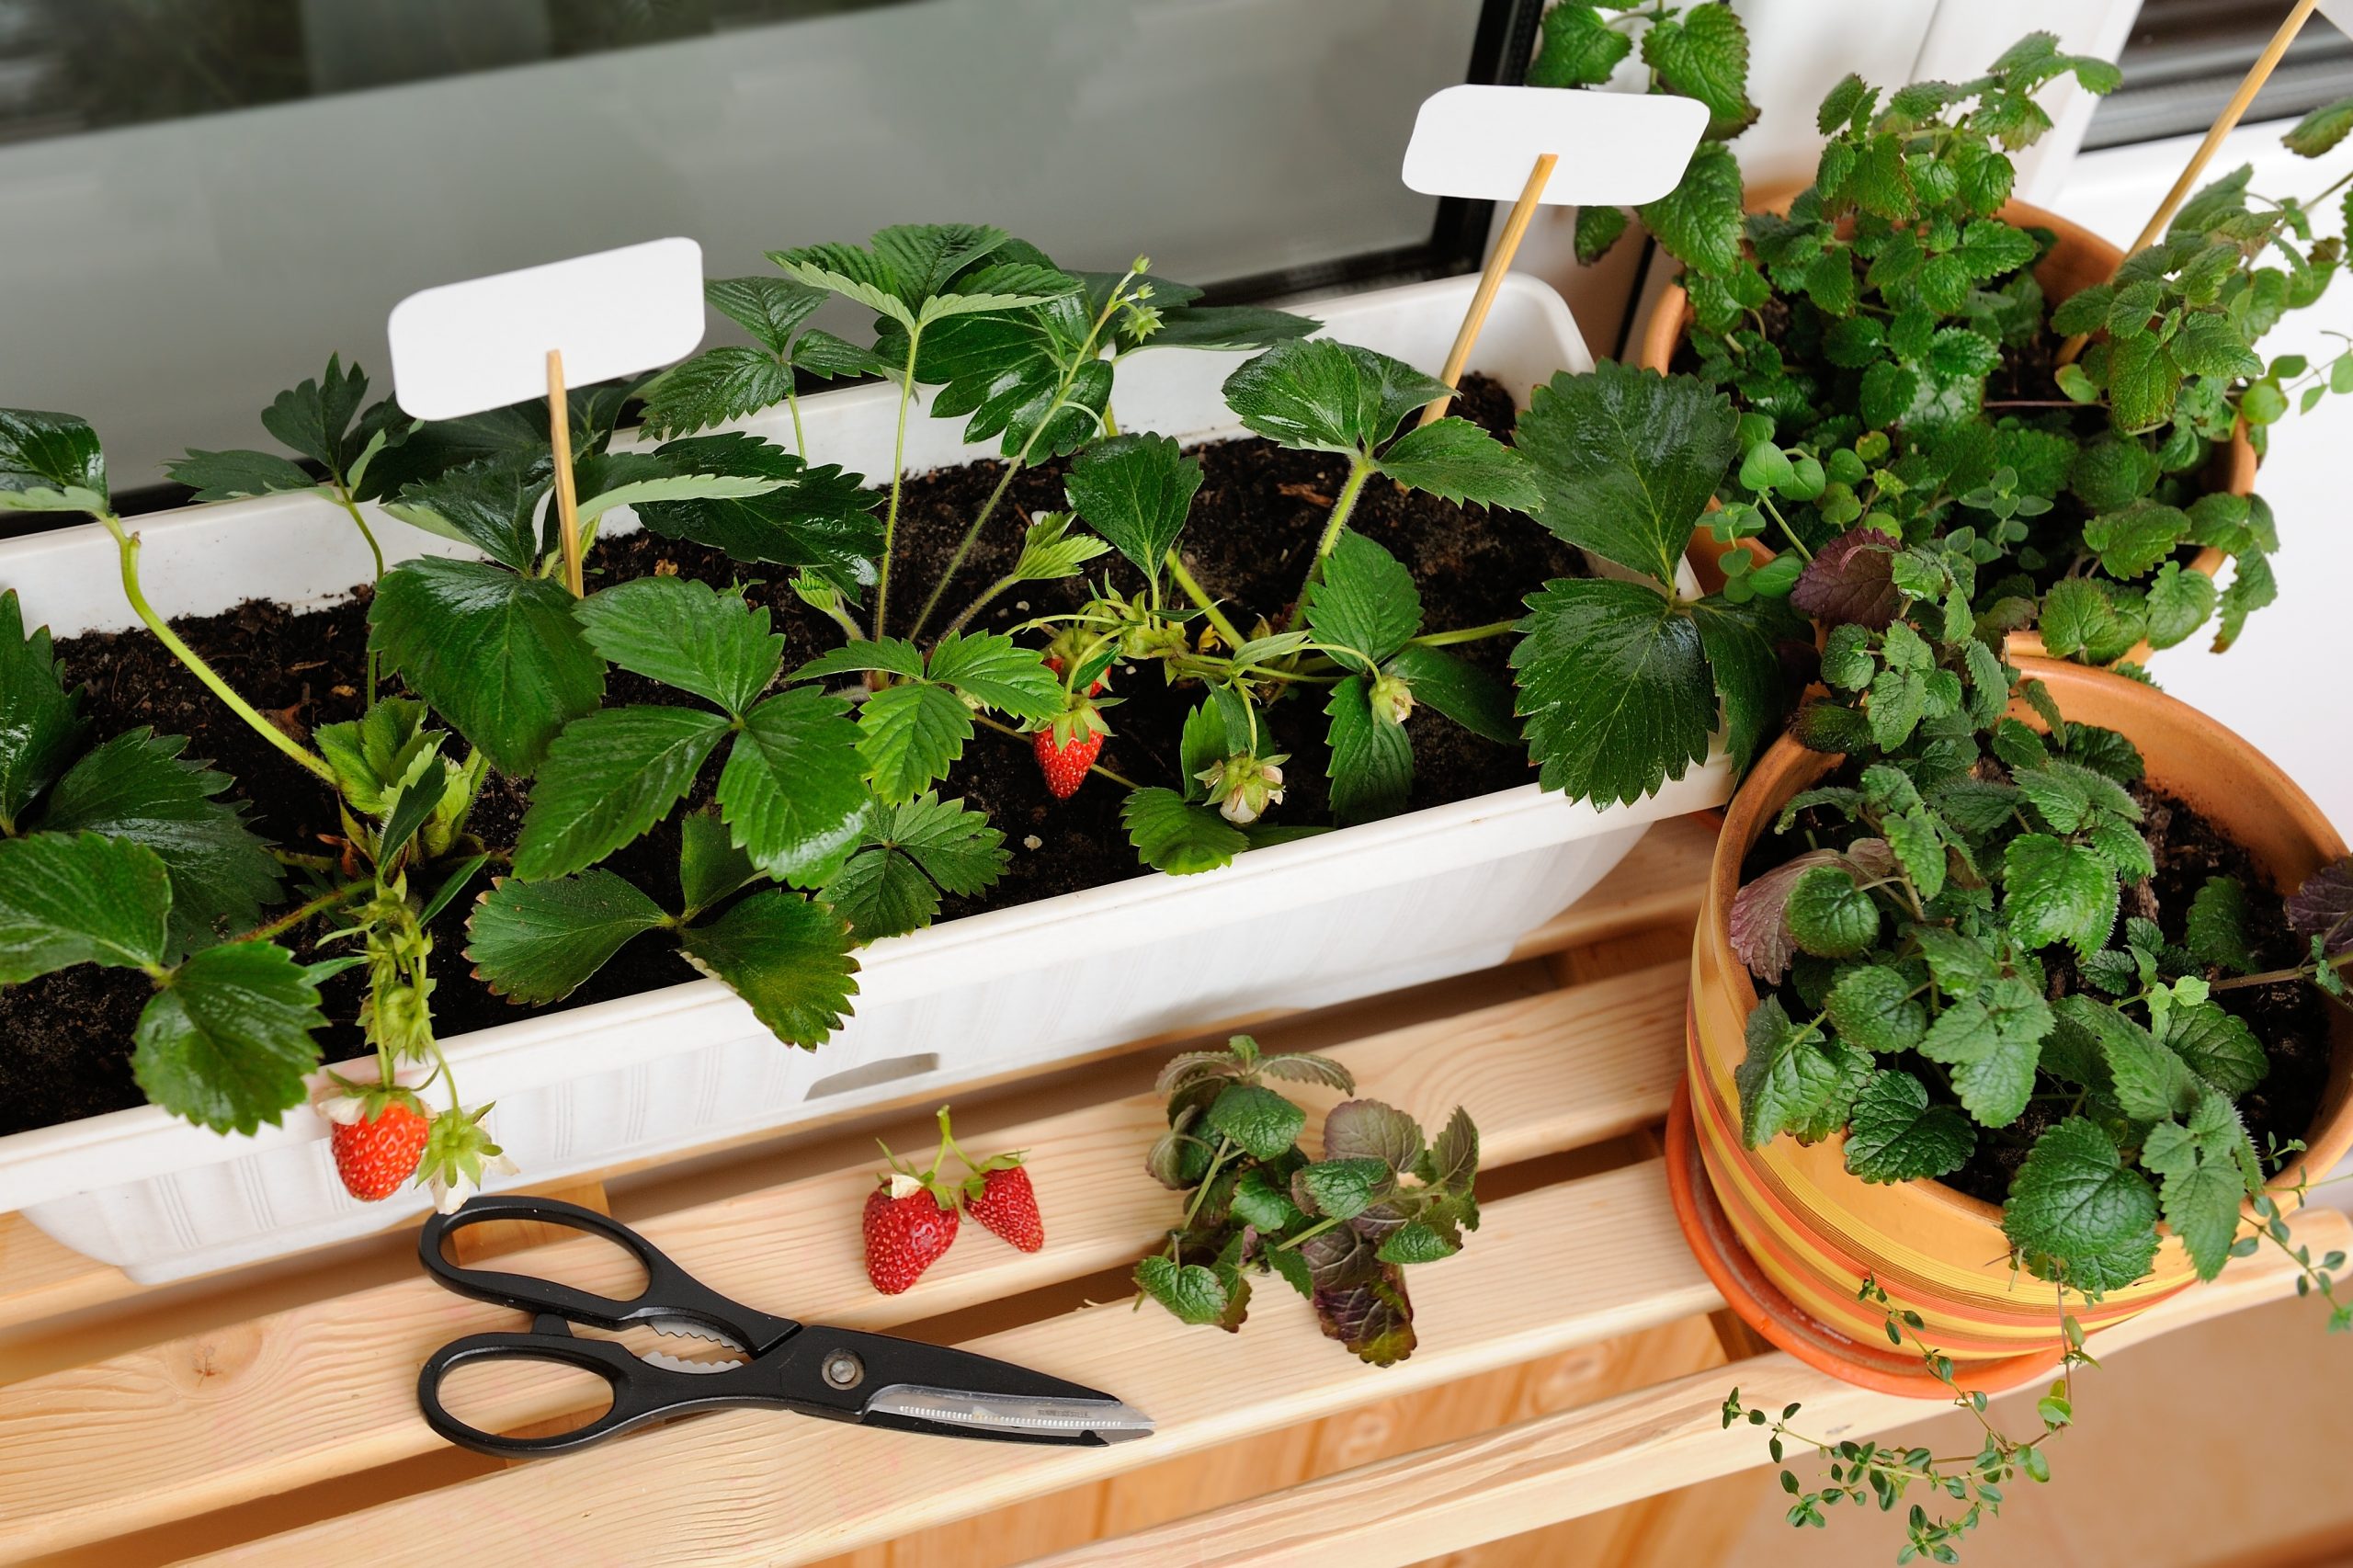 Can you grow fruit on your balcony?